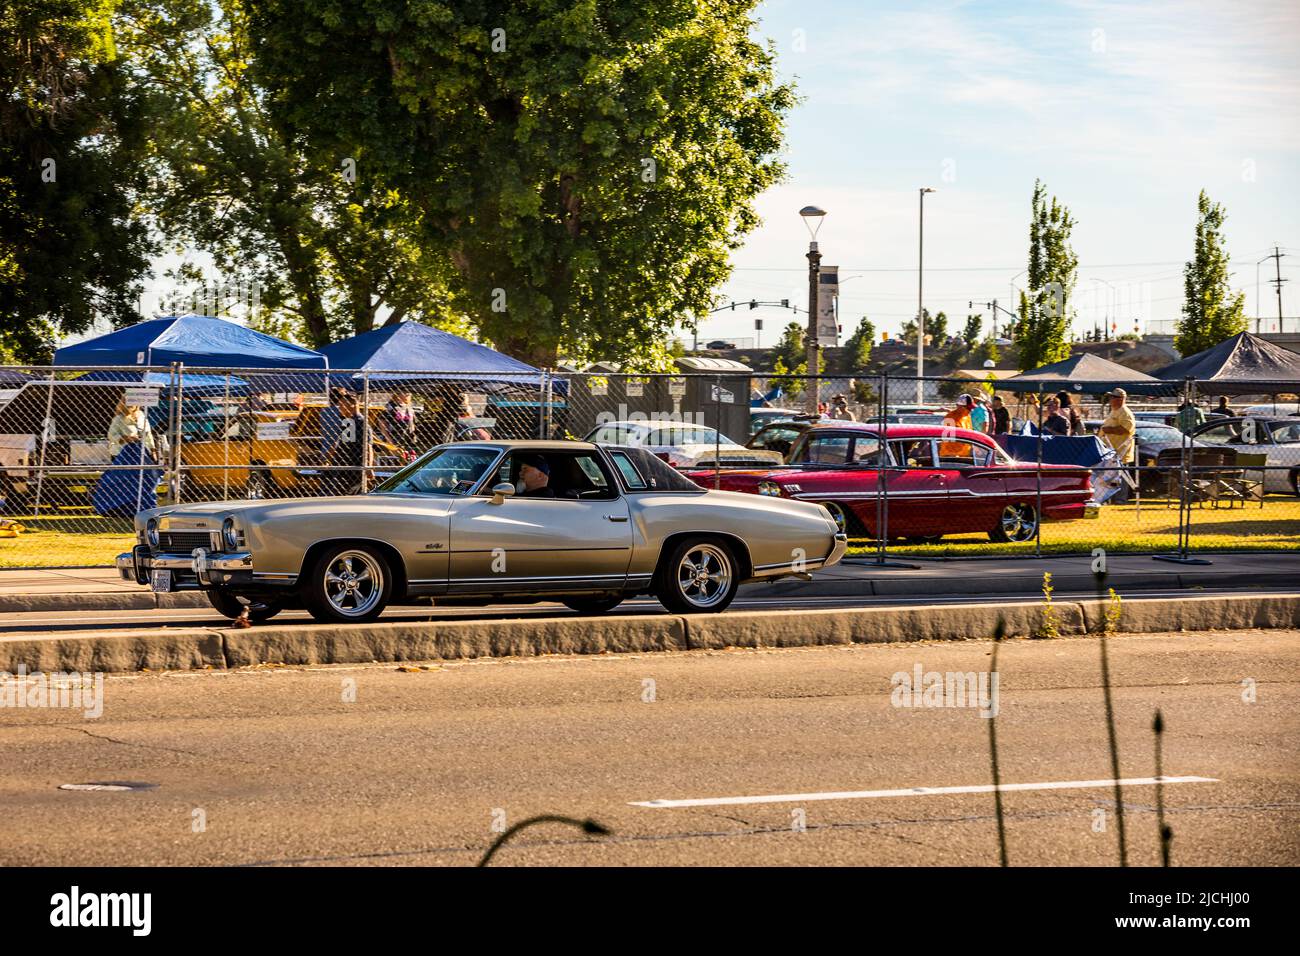 A 1973 Chevy Monte Carlo arrives at the American Graffiti charity Car Show at the Modesto Junior College campus June 11-12 2022 Stock Photo